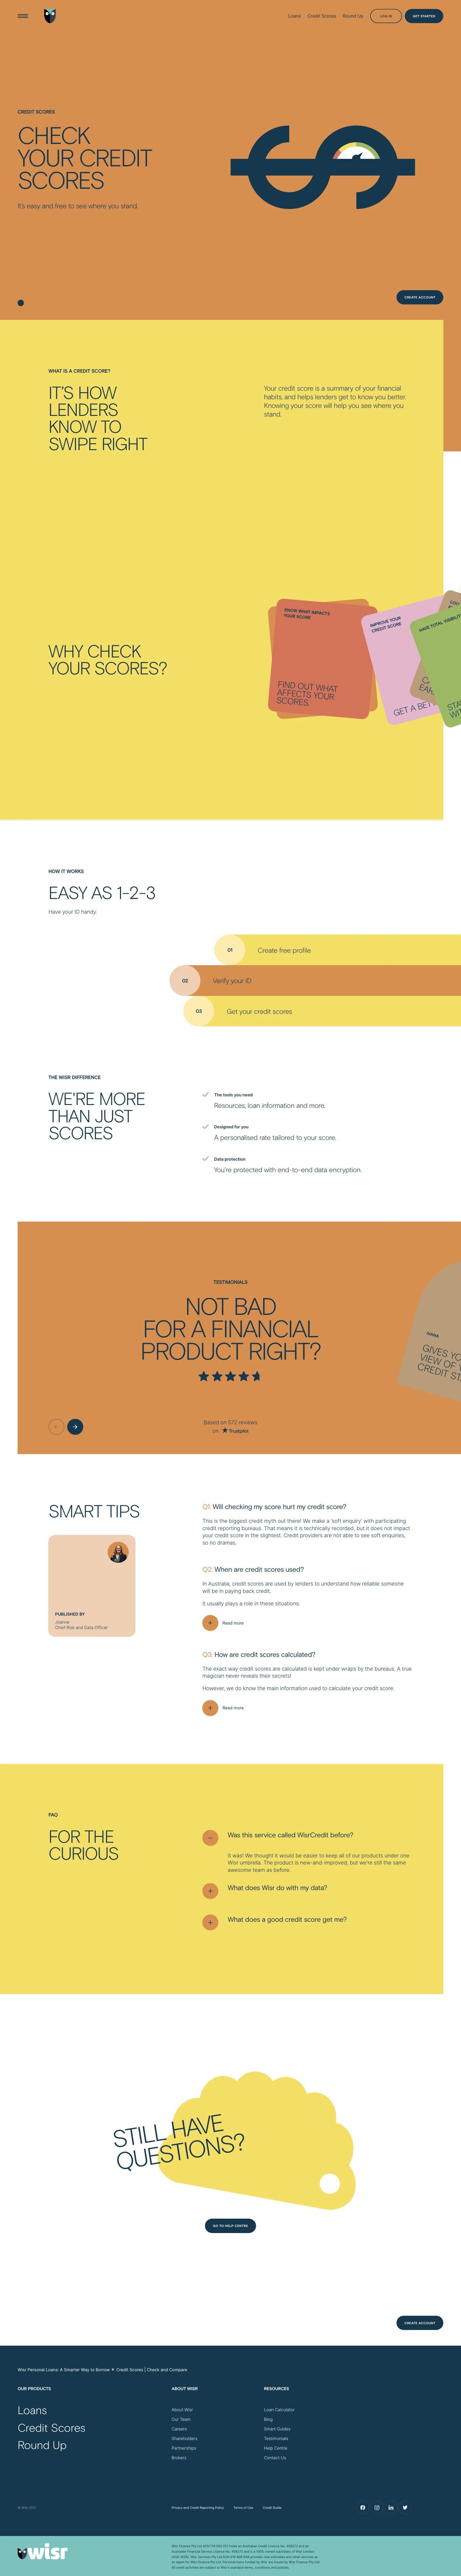 Wisr Landing Page Example: Nobody is smart 100% of the time. But when it comes to important financial stuff, Wisr makes good decisions easy. We can help with personal loans, credit scores and more.